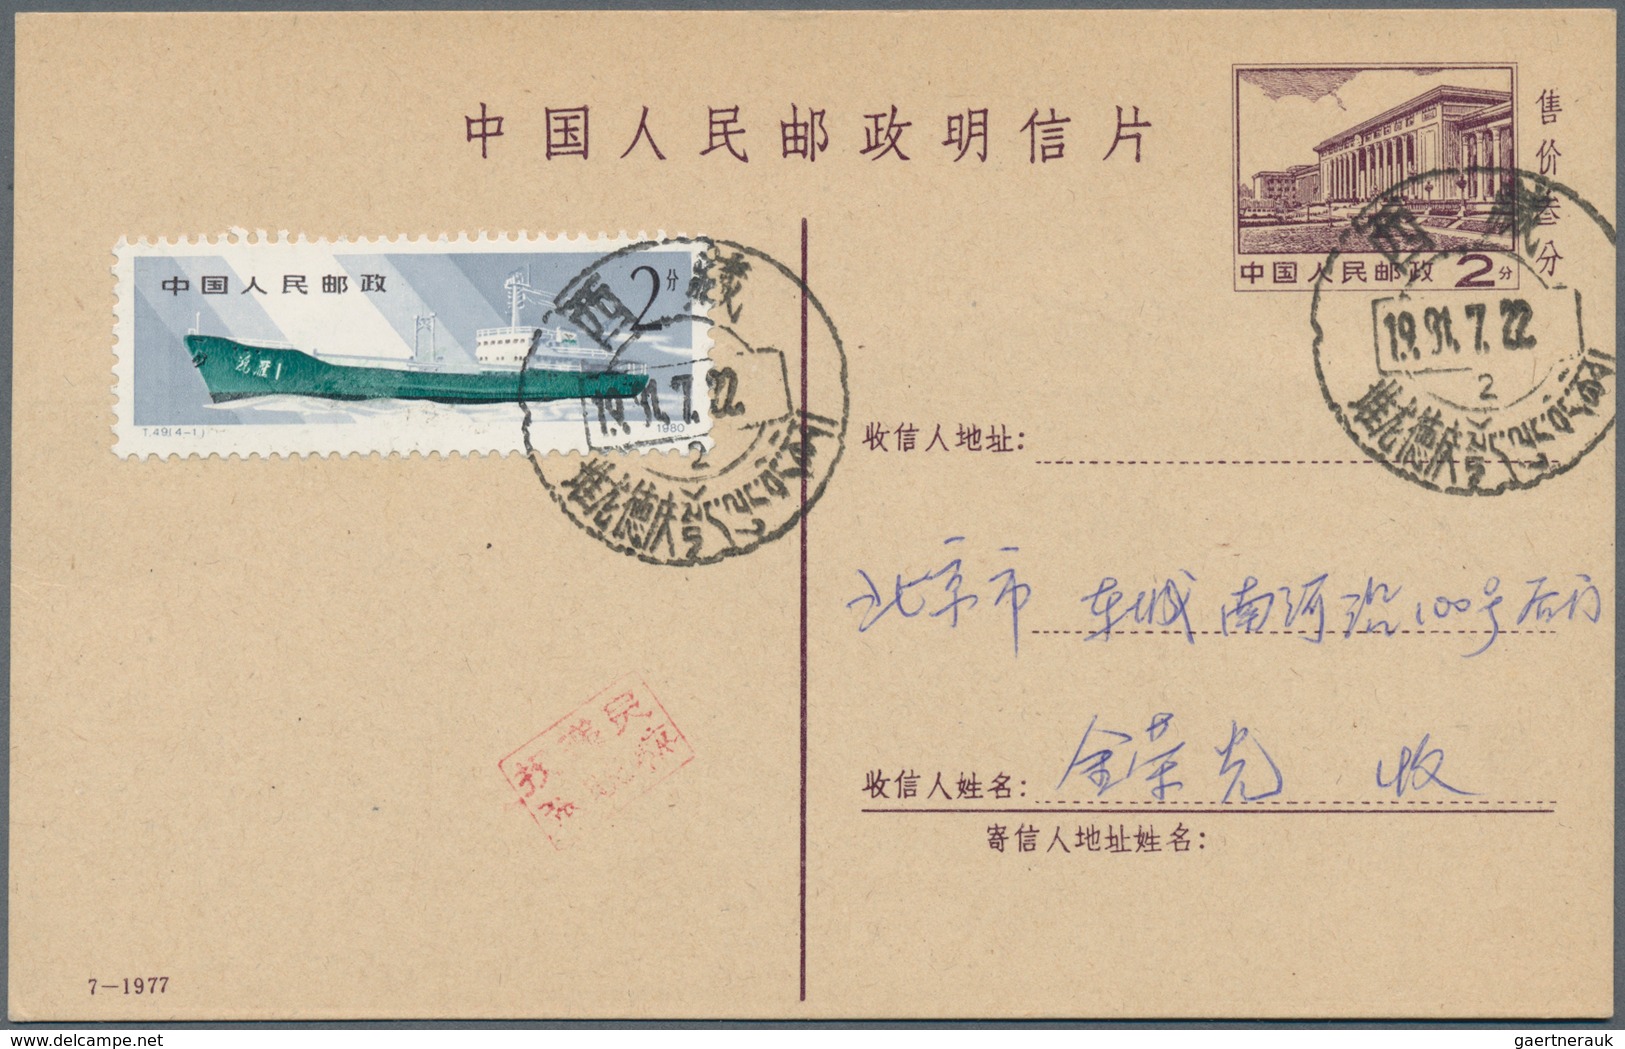 China - Volksrepublik - Ganzsachen: 1977/81, Used In Tibet, Card 2 F. Uprated To Peking: 7-1977 By 1 - Postcards